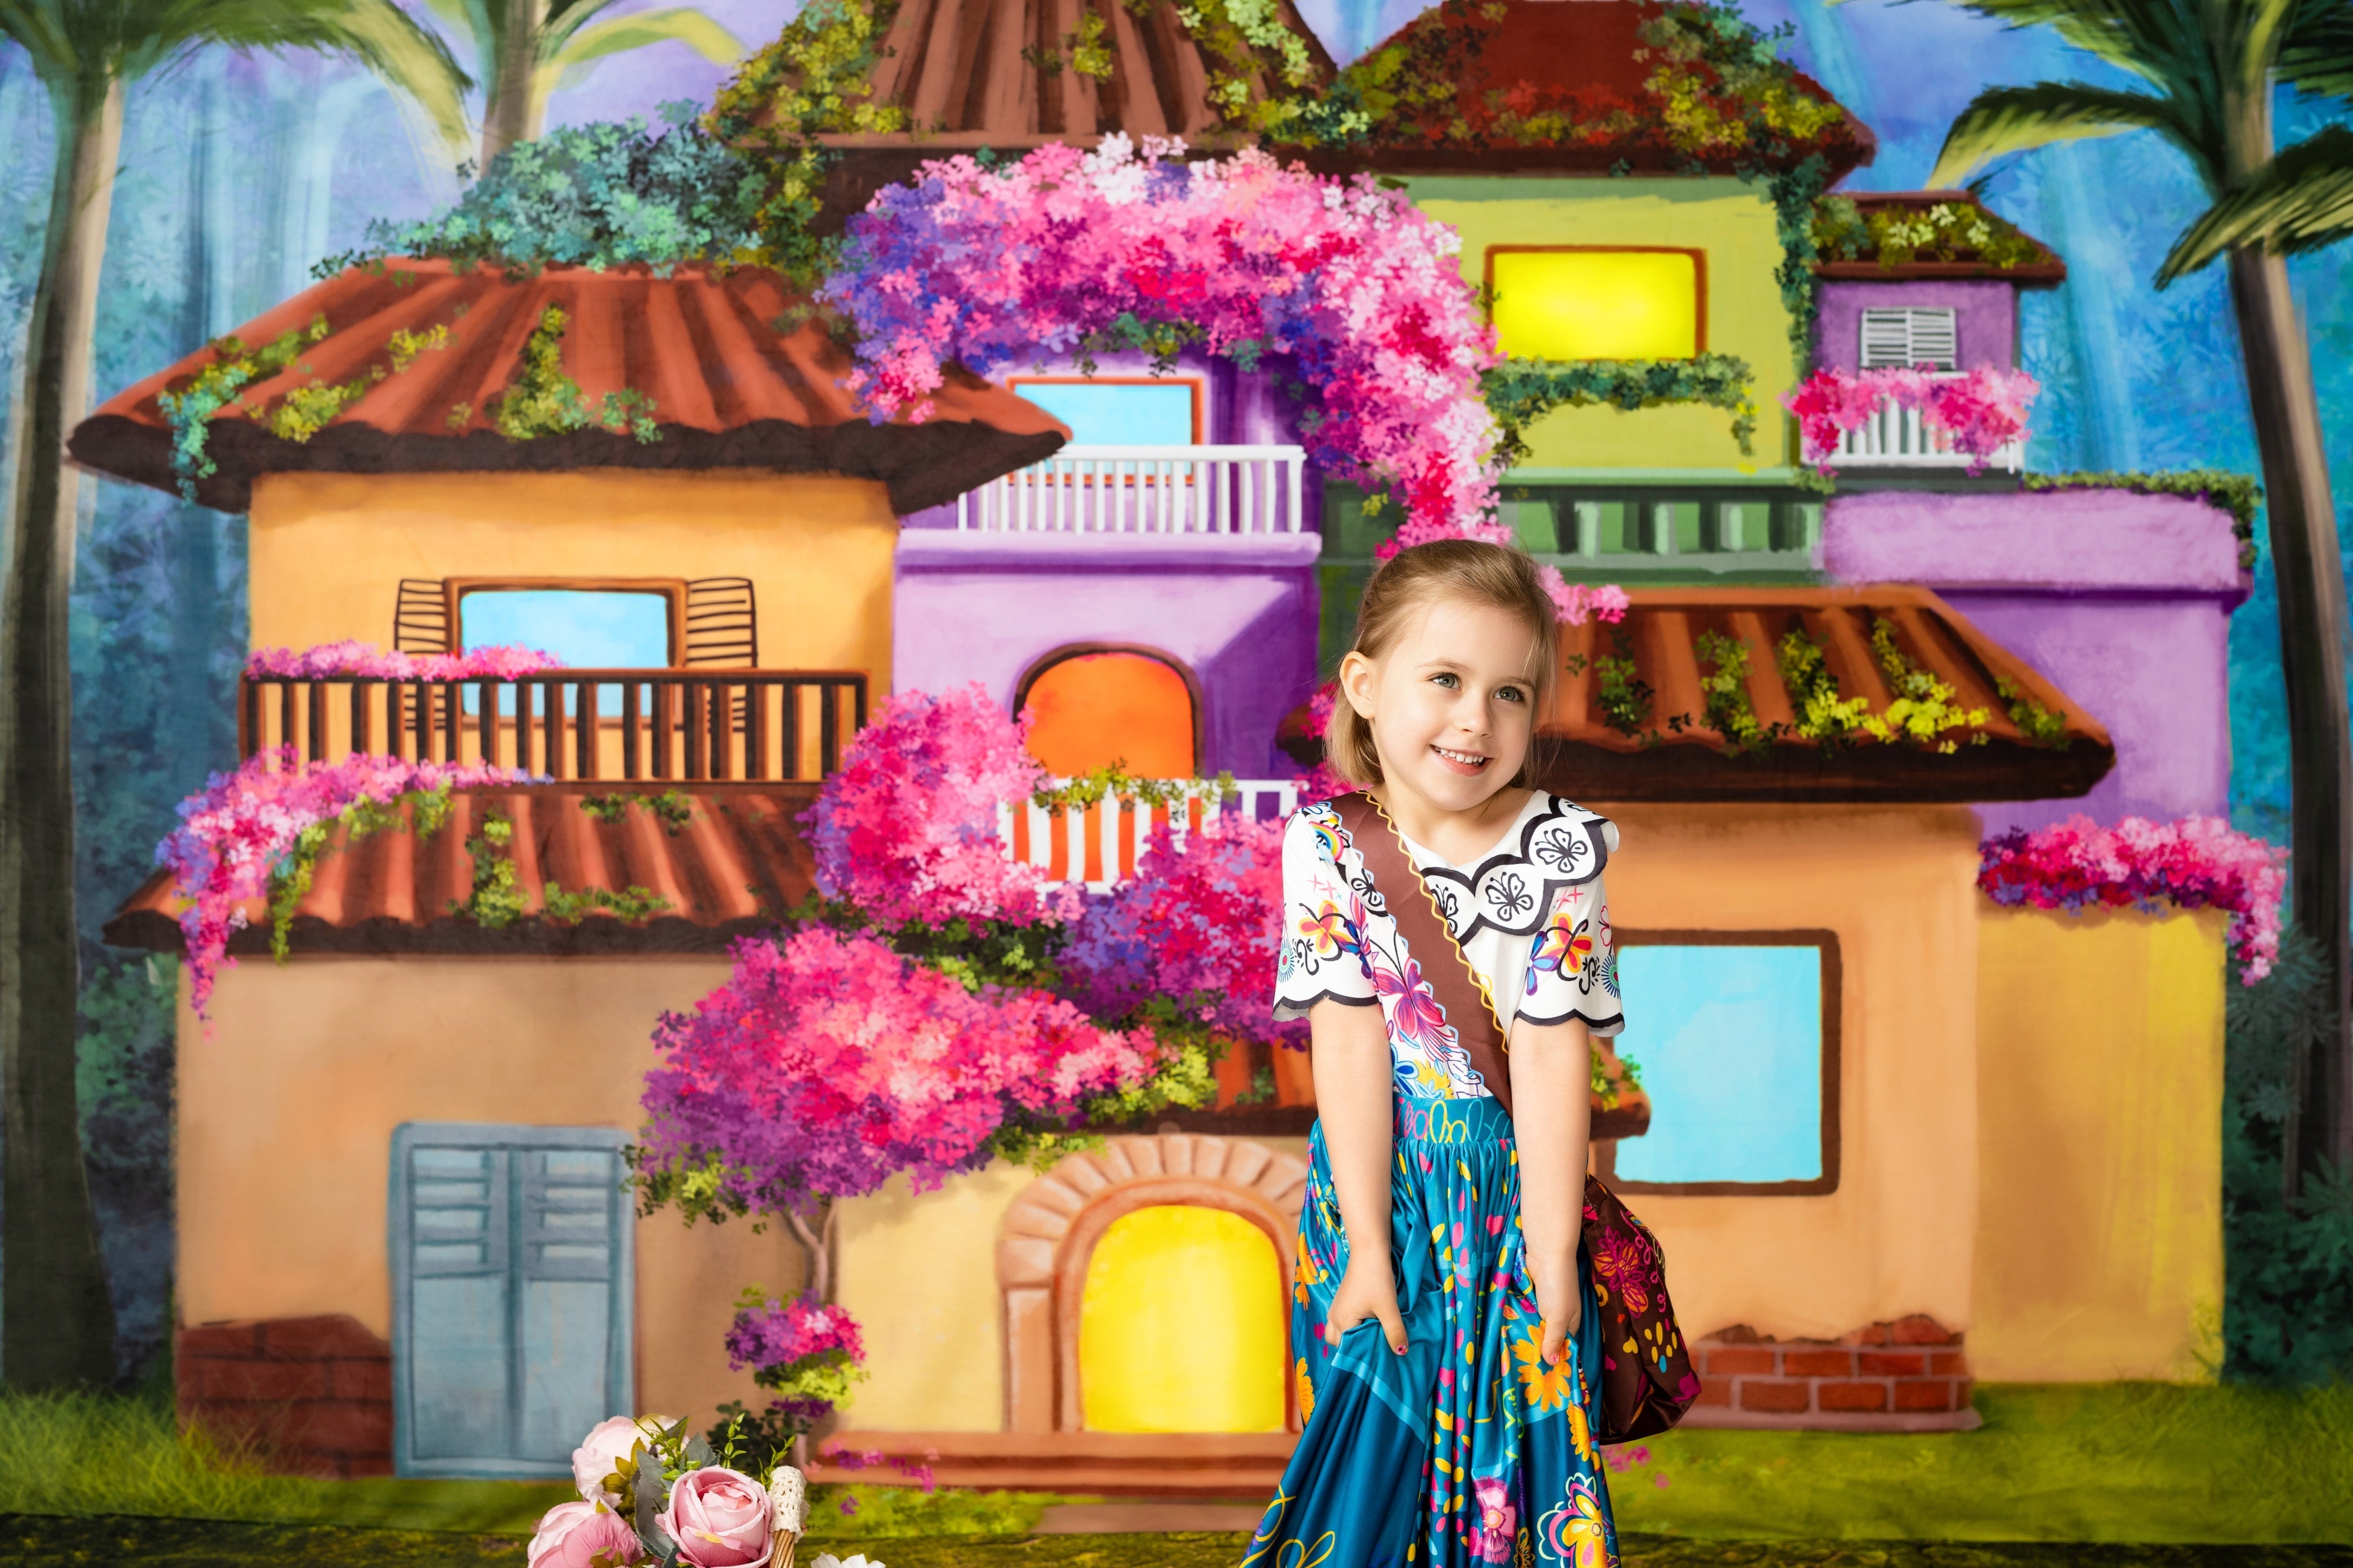 Kate Magic Flower Hut Backdrop Spring for Photography(Clearance US only)